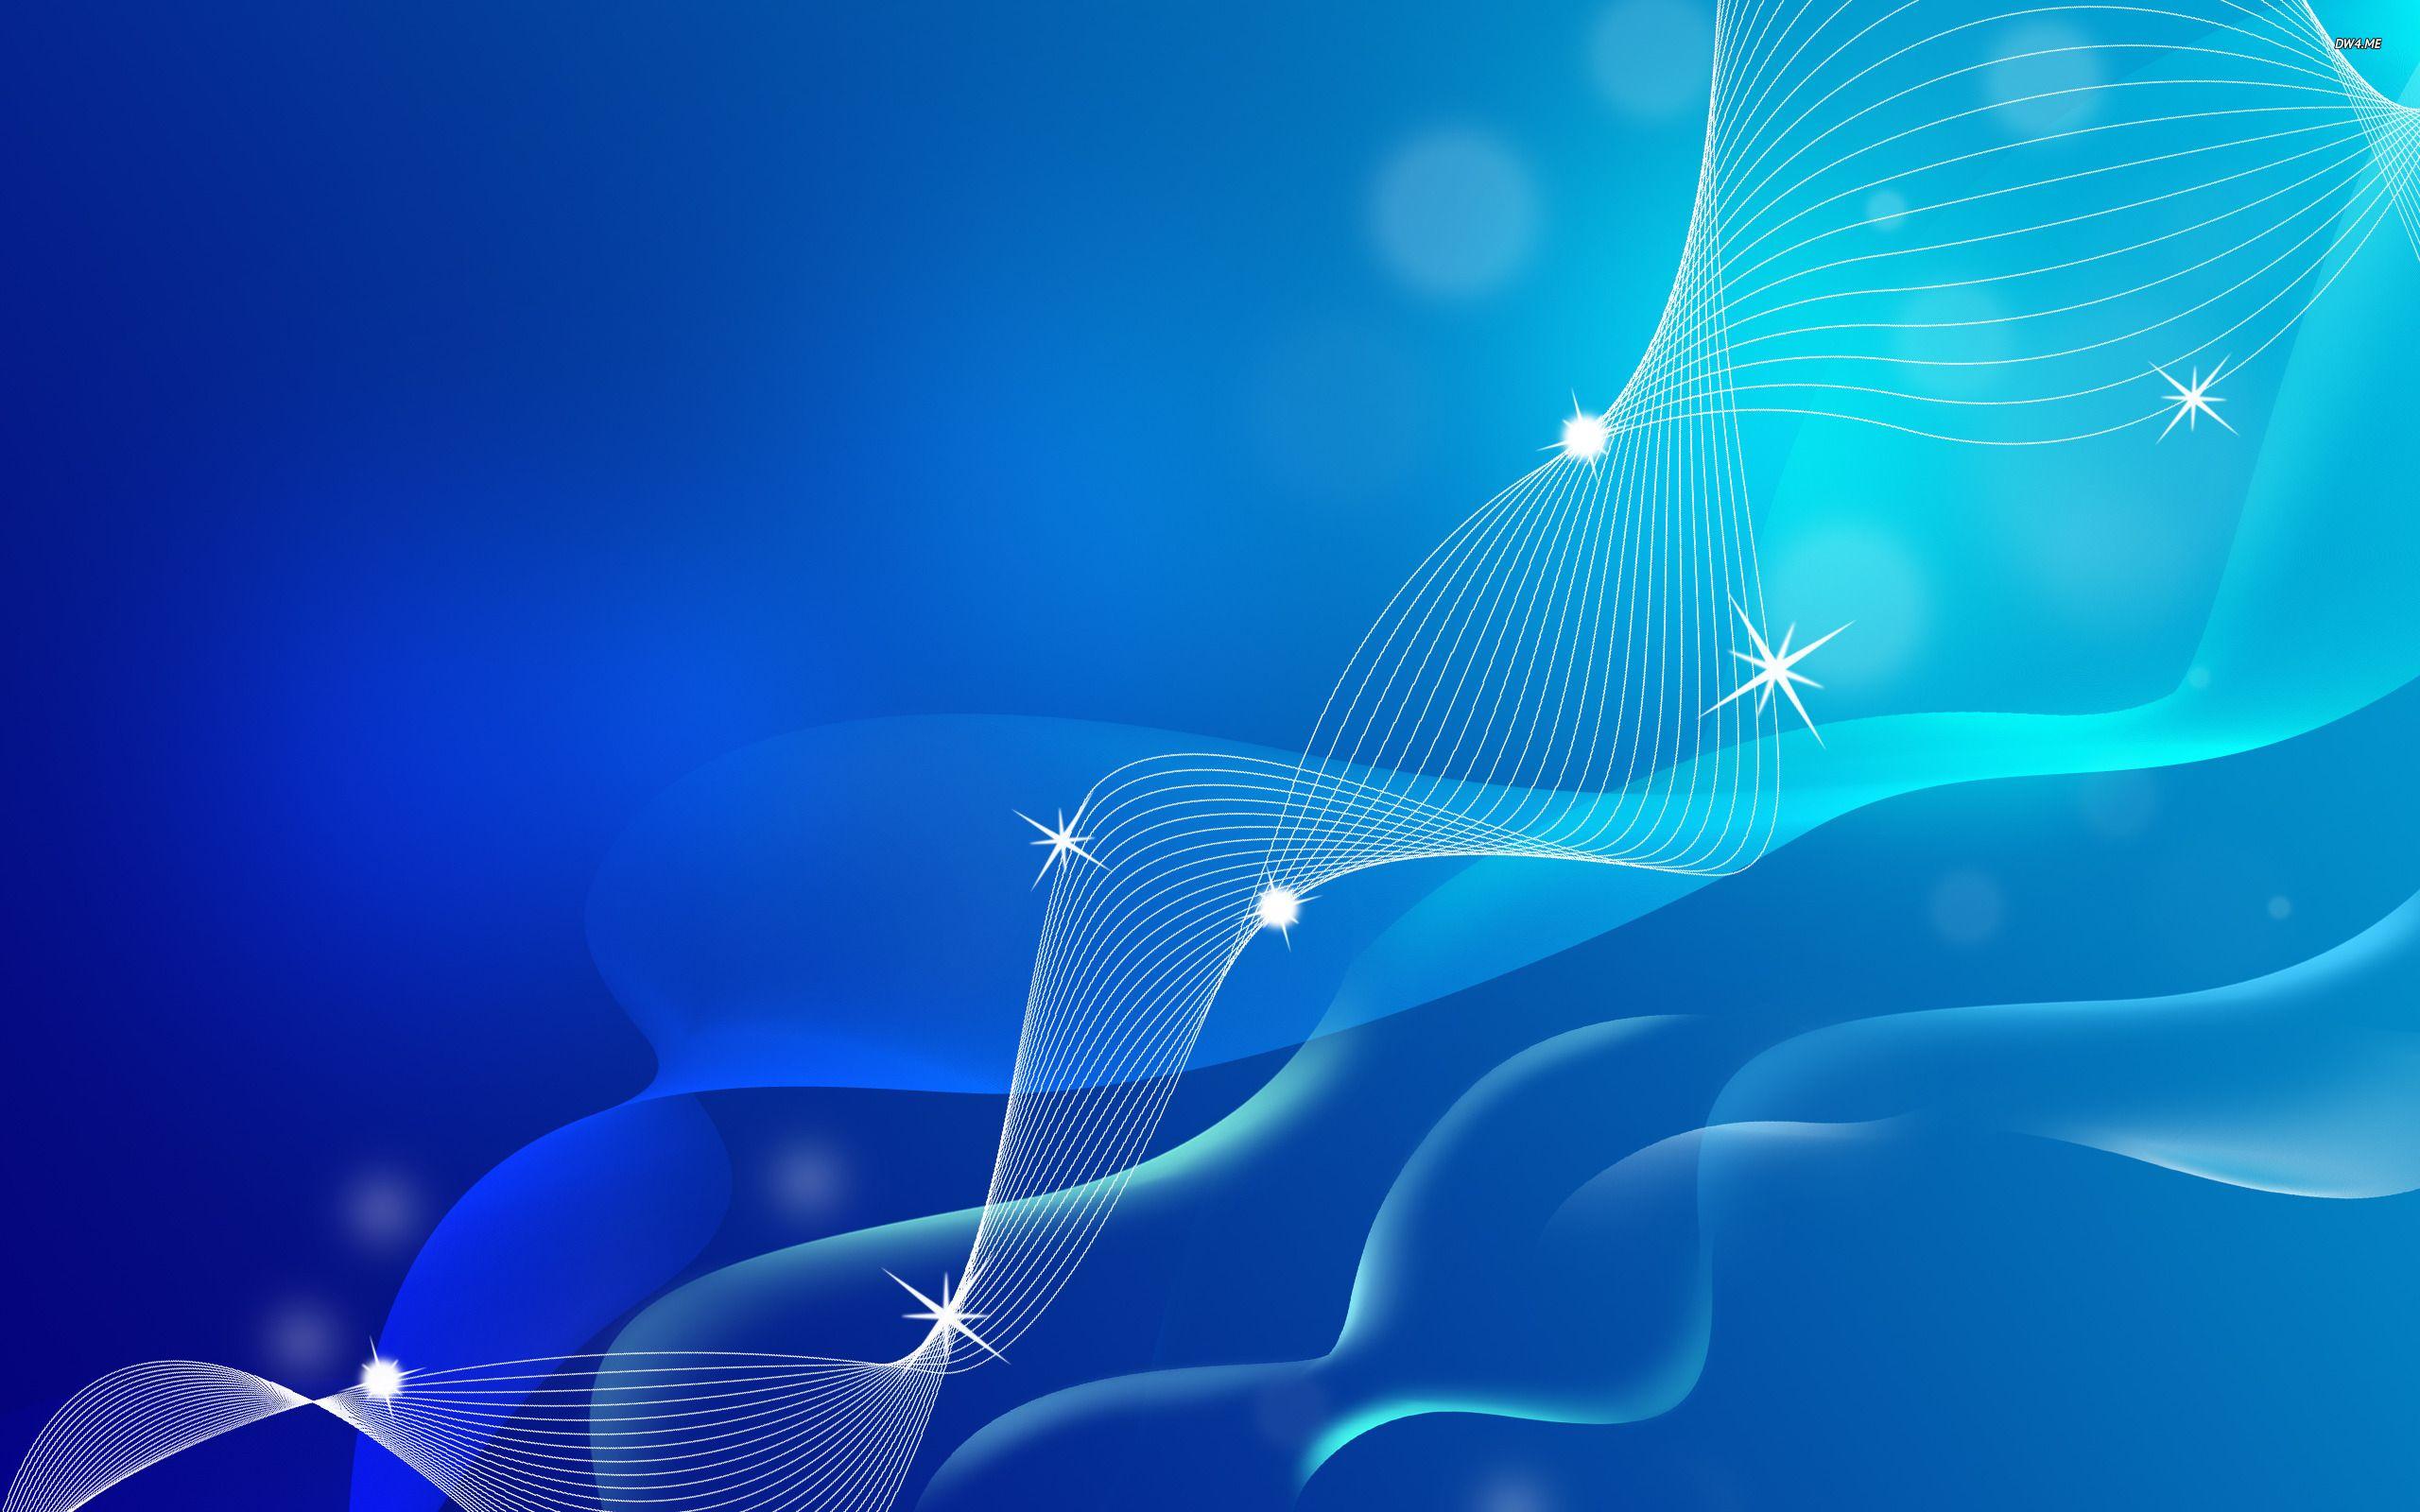 Abstract Blue Wave Background Images  Free Download on Freepik